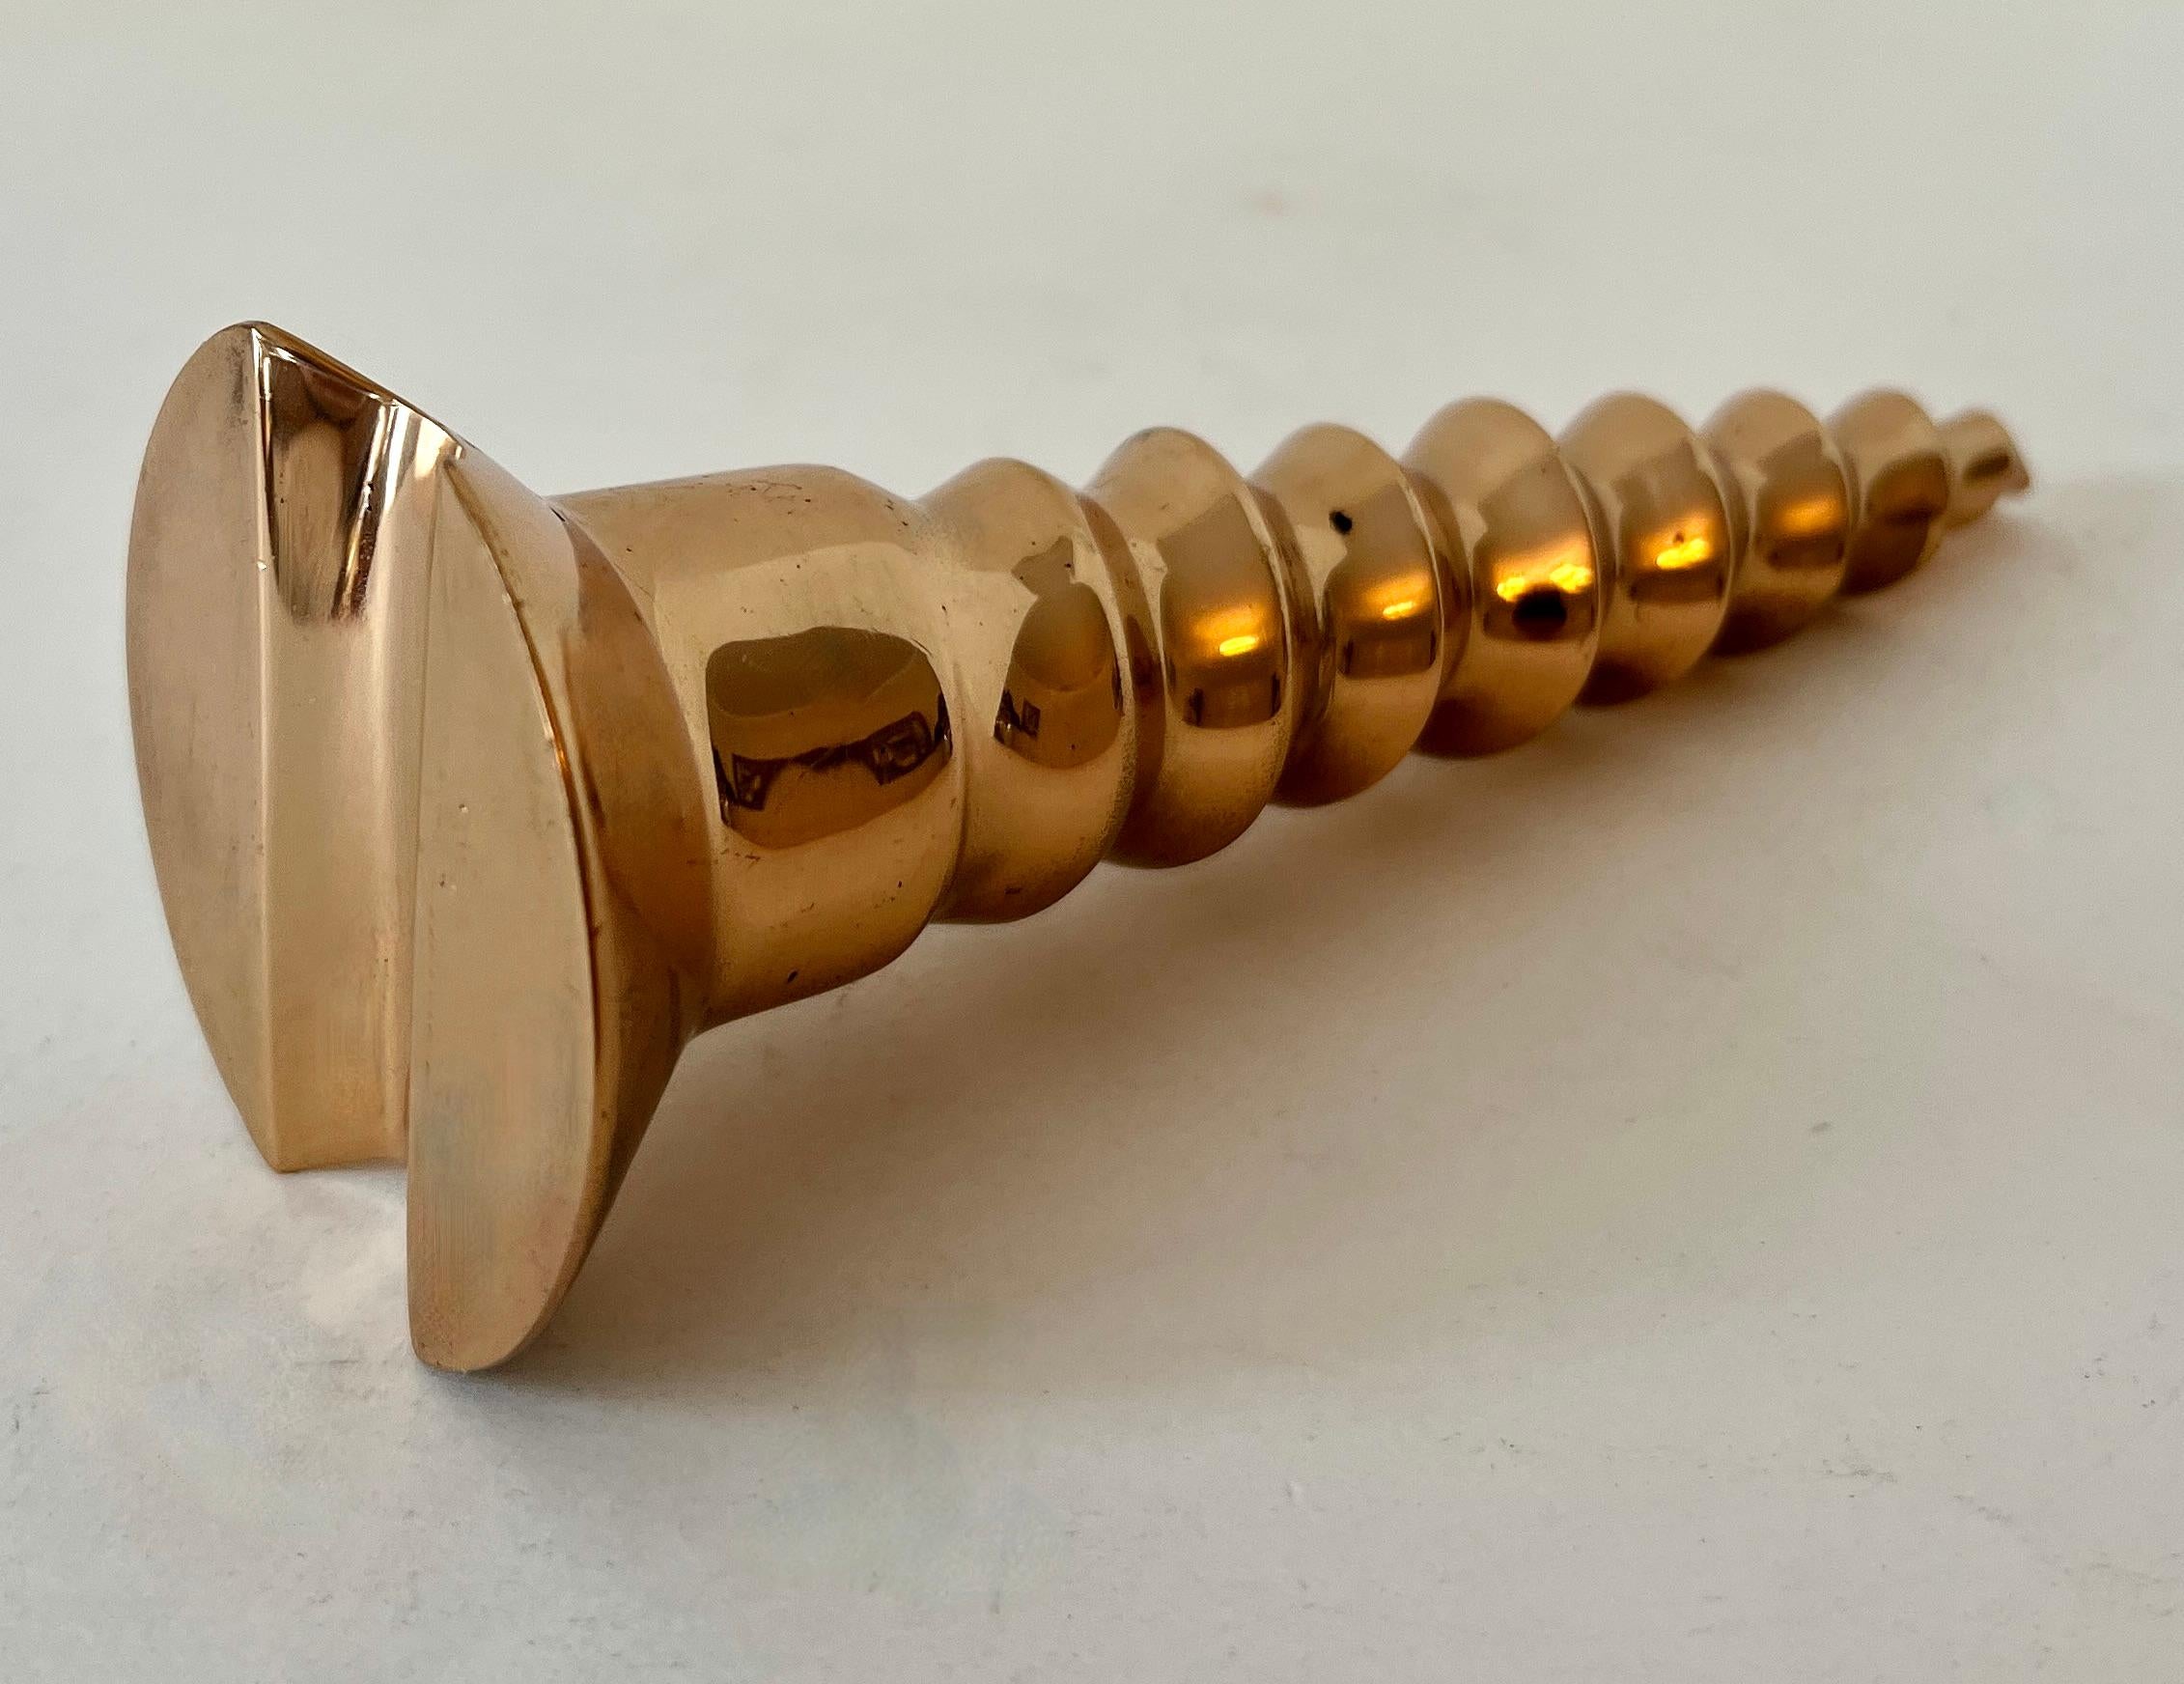 A heavy and over sized Polished brass Screw.  The piece is quite attractive and ready for any desk or work station in need of a paperweight.. whimsical and classic design.

The piece would be a compliment to any space that is, perhaps, an office for